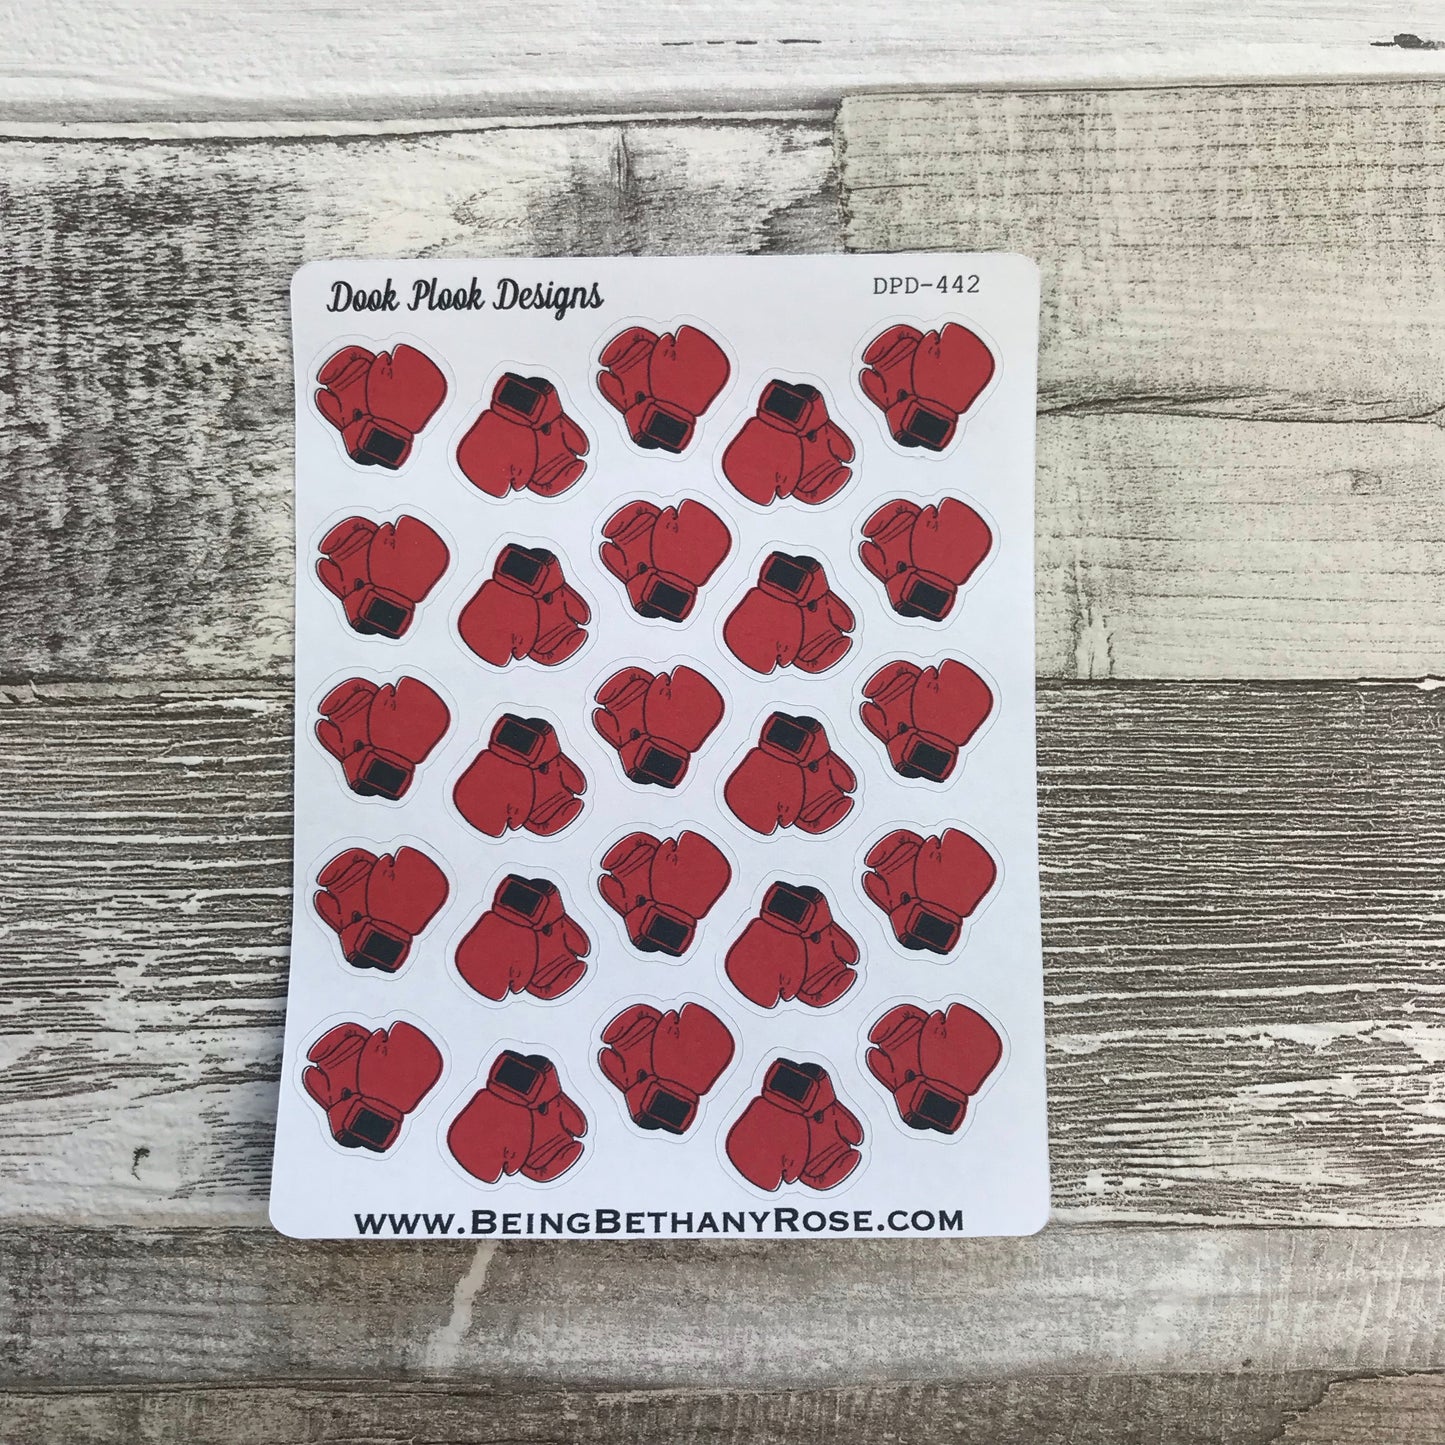 Boxing/boxercise stickers (DPD442)